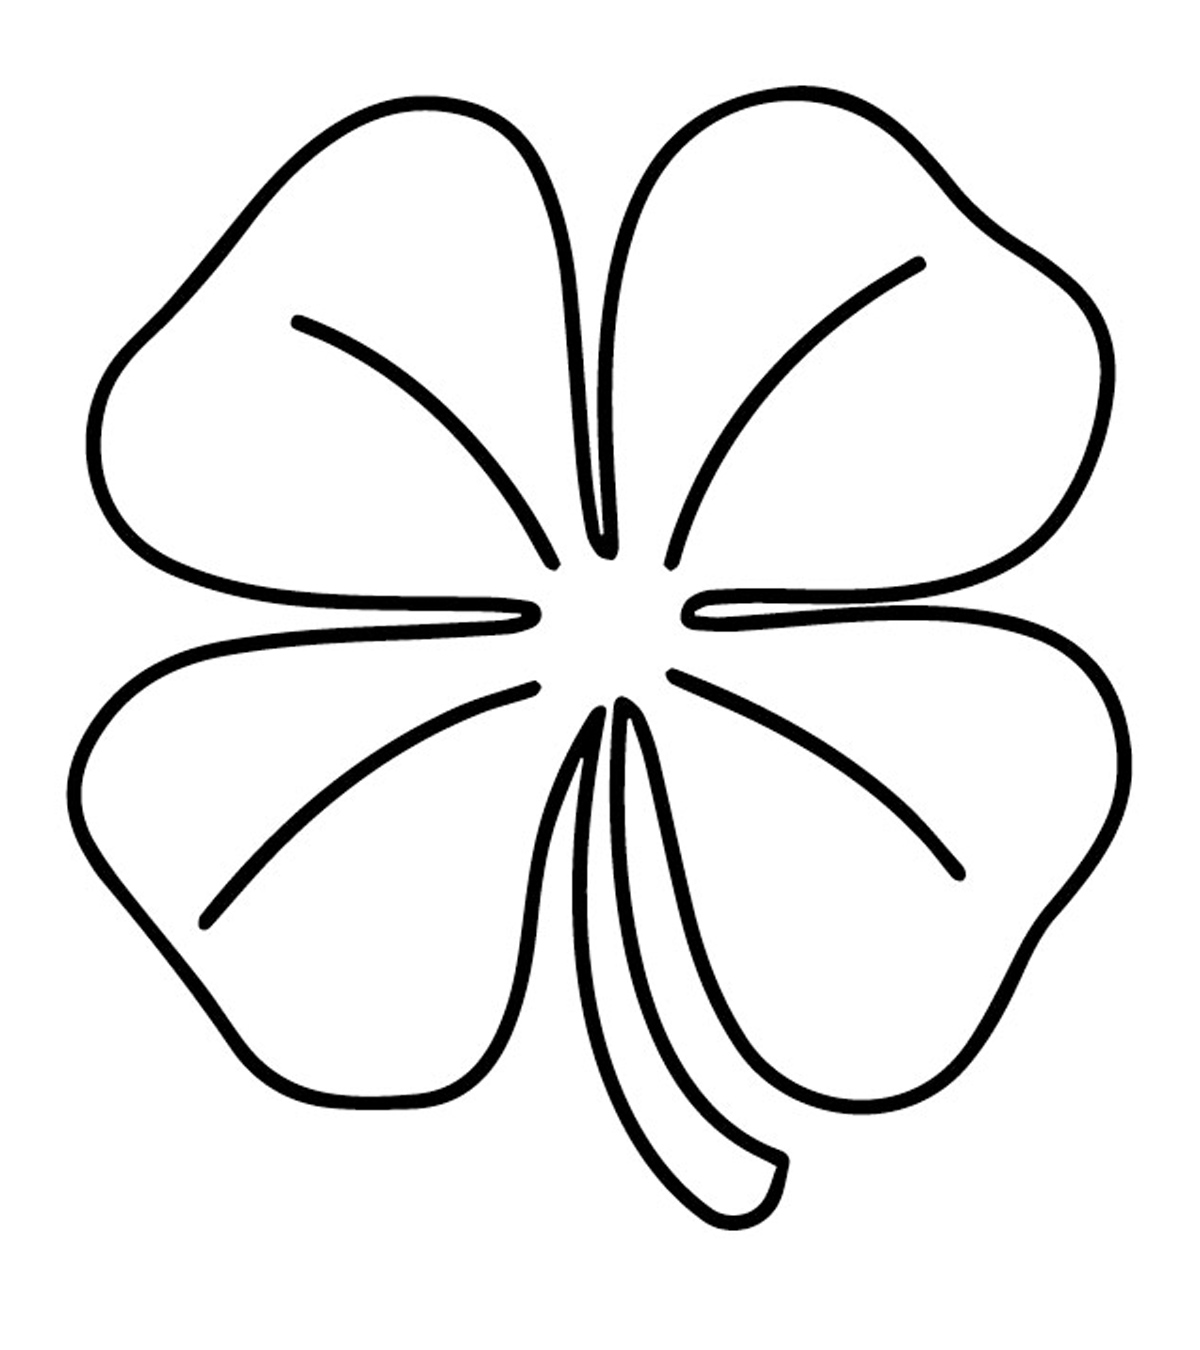 Top 20 Four Leaf Clover Coloring Pages For Toddlers